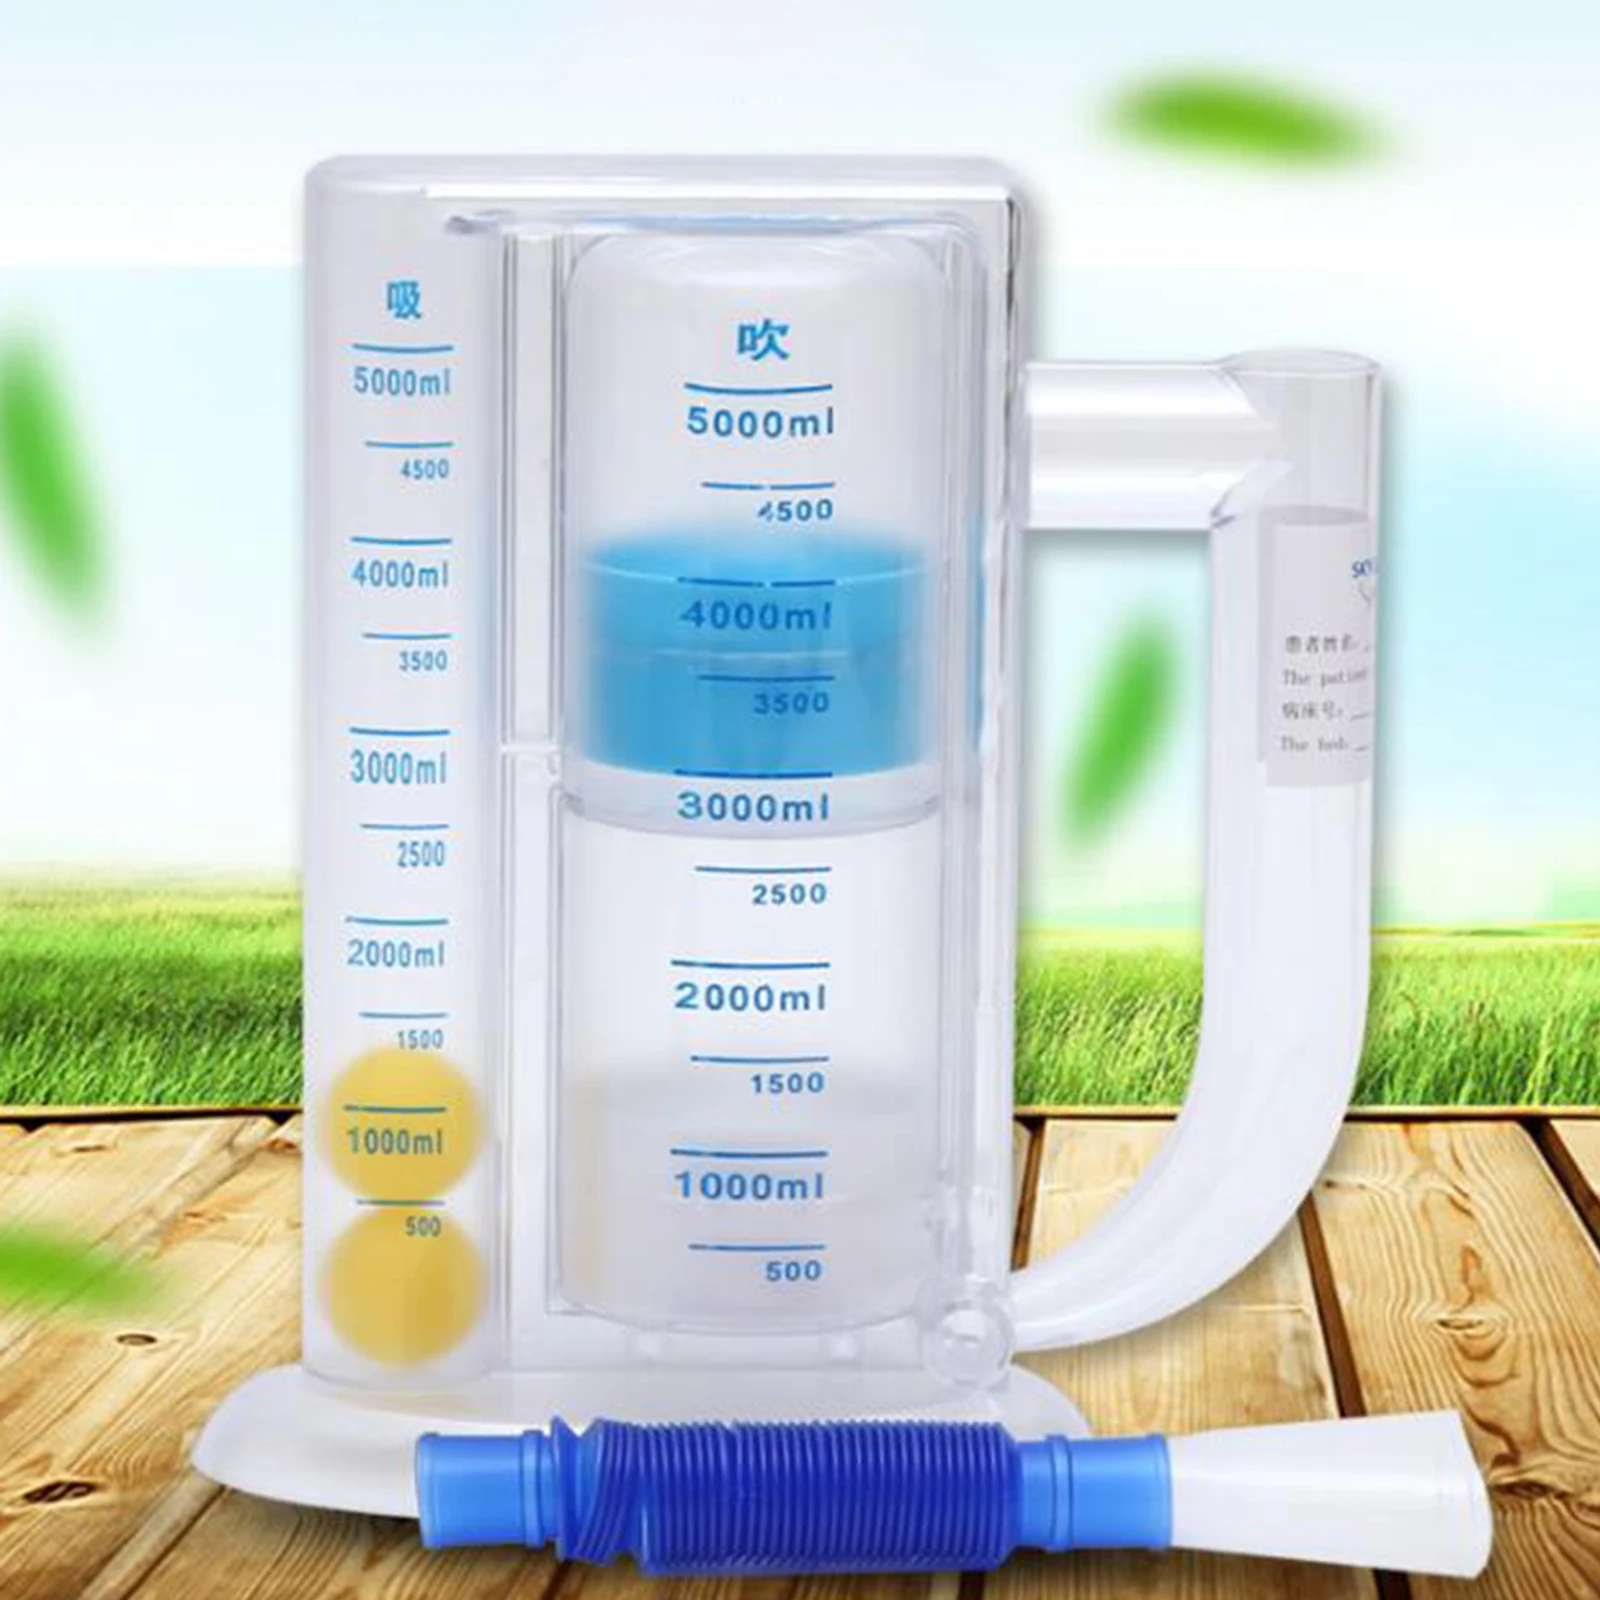 5000ml Lung Deep Breathing Trainer Exerciser, Breath Measurement System